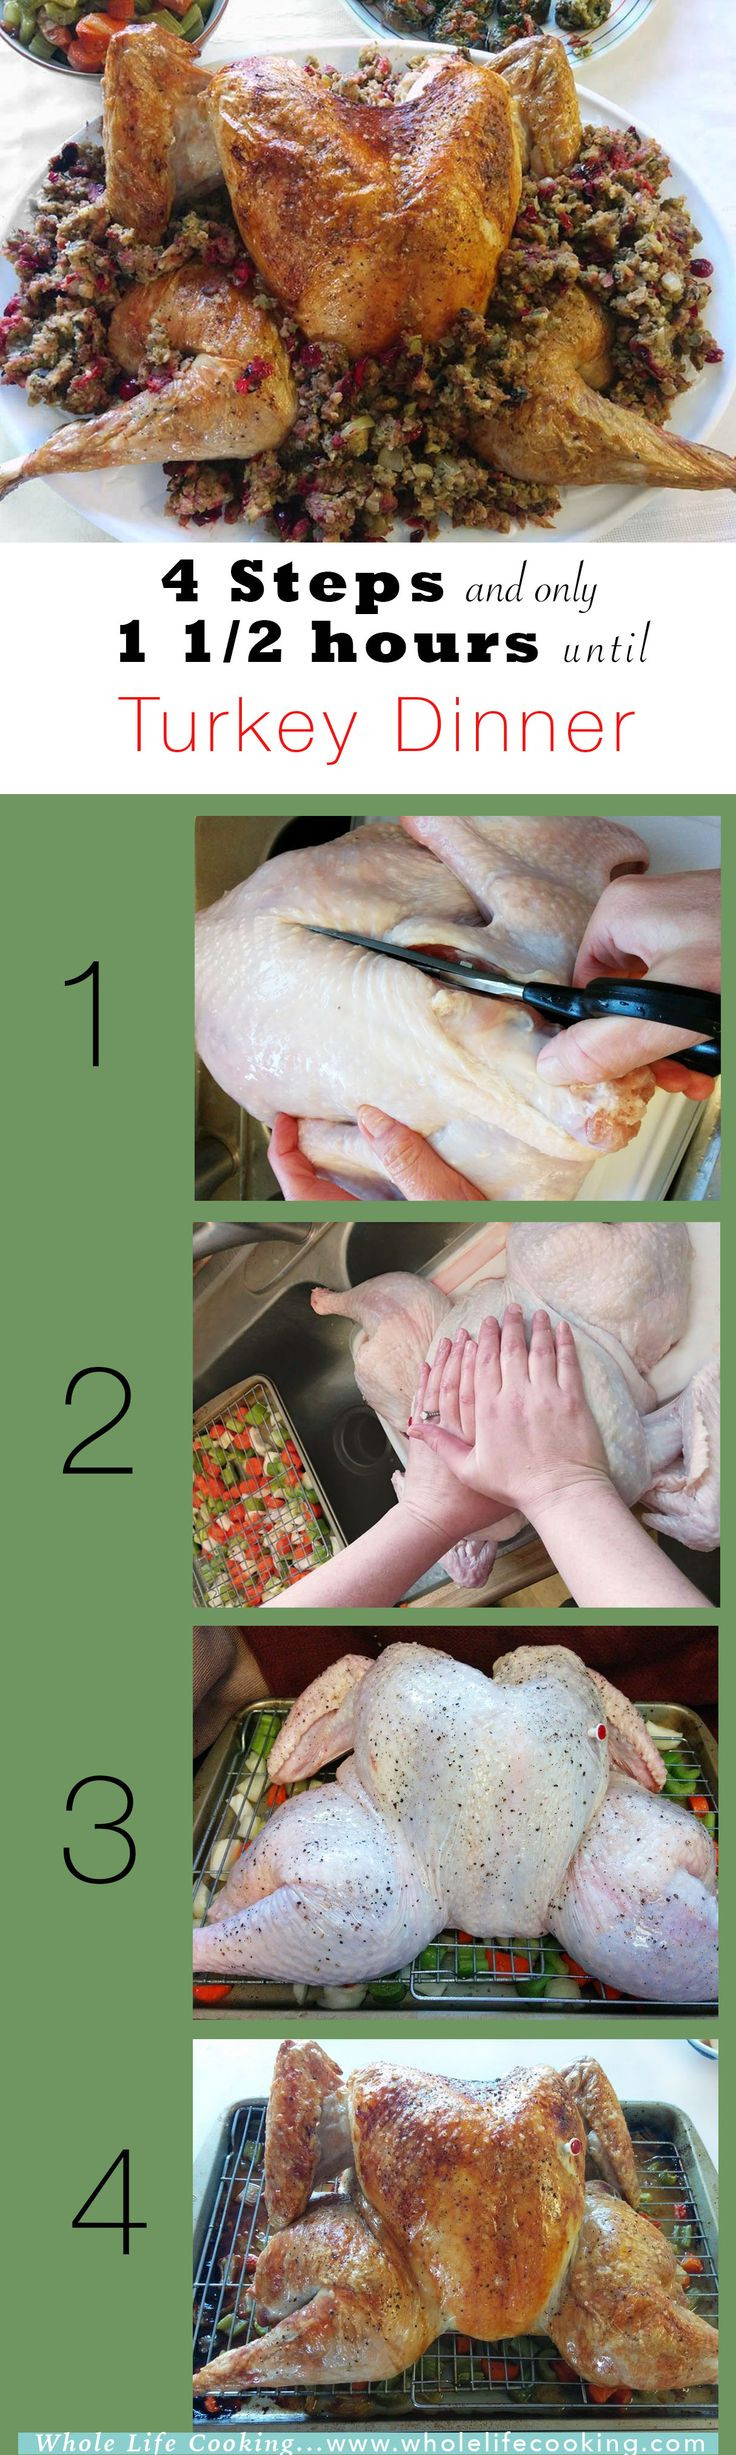 Meat For Thanksgiving Other Than Turkey
 17 Best images about Turkey Duck & other "Fowl" things on